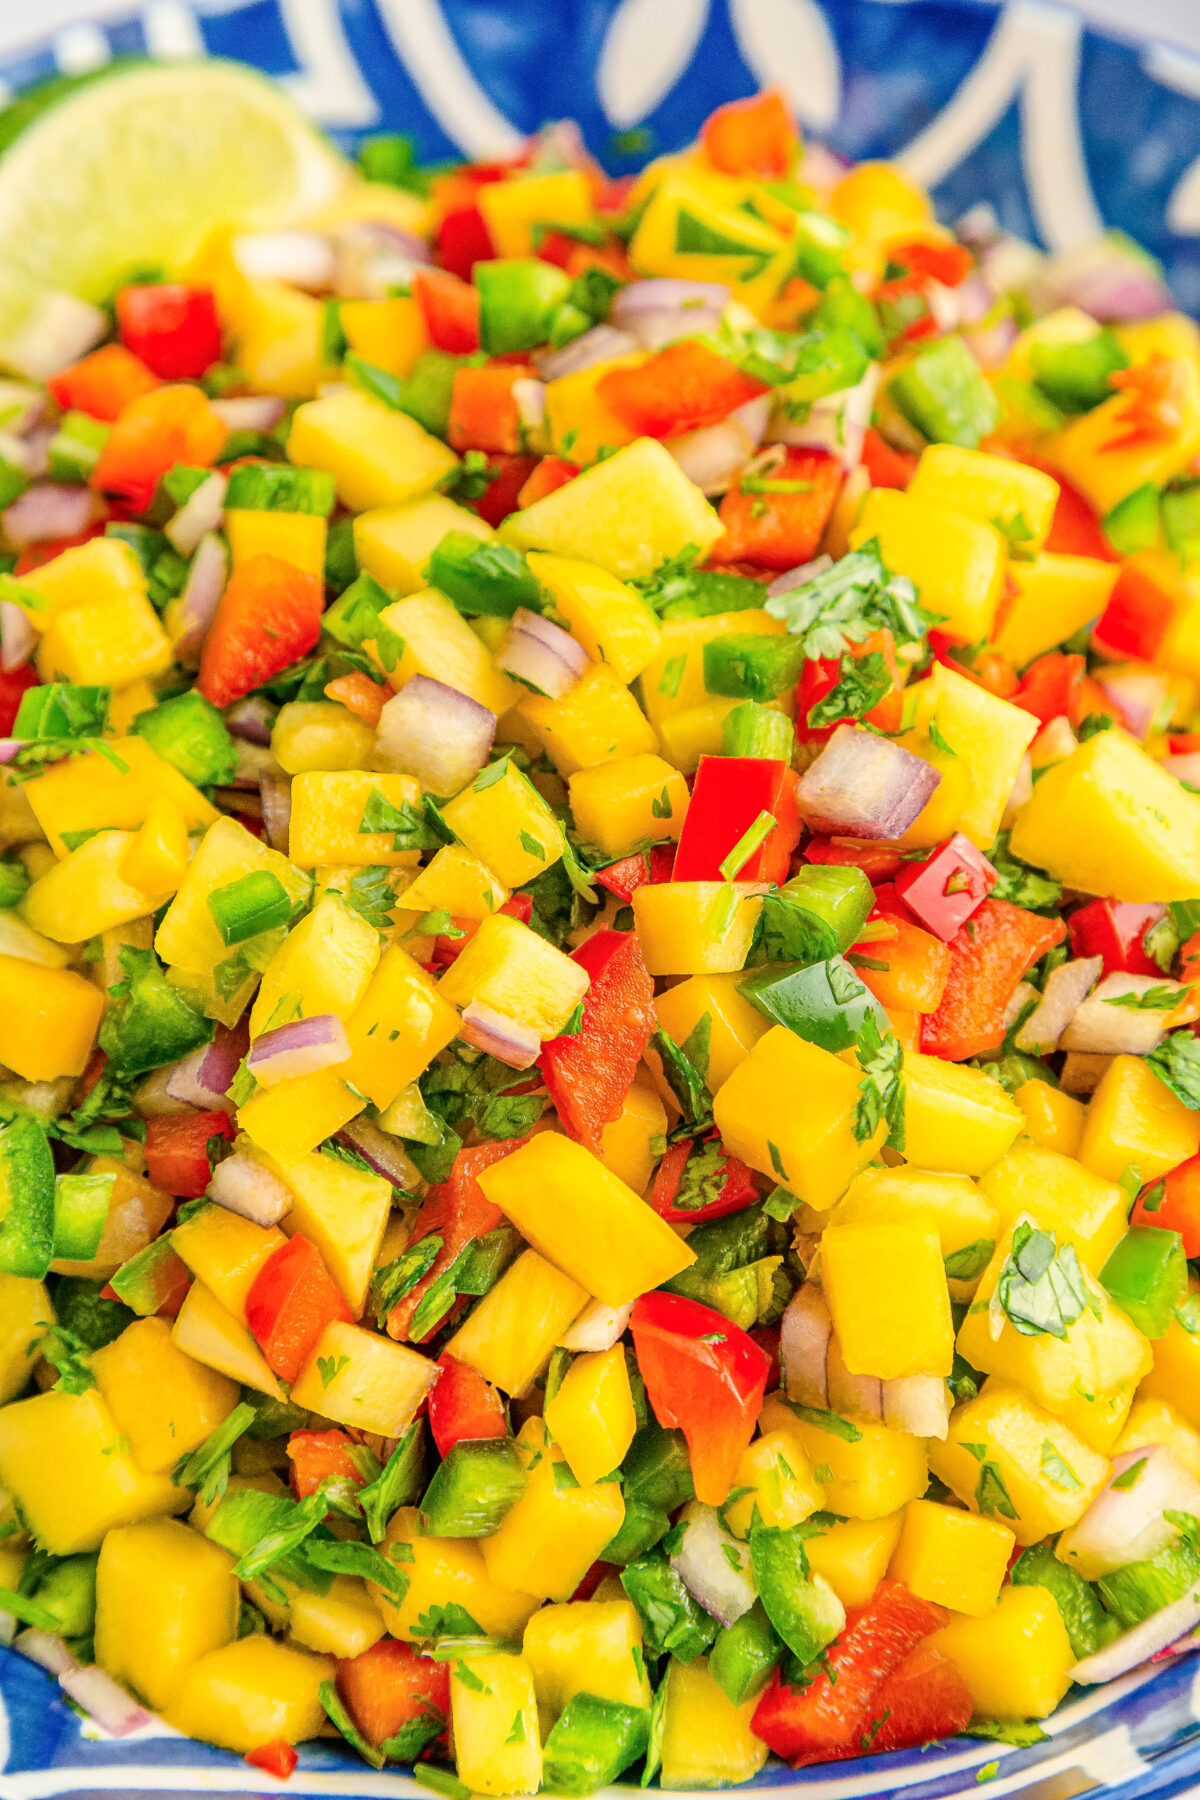 Brighten up your summer menu with this bright and zesty mango salsa. Whip it up and enjoy a tasty mix of sweet, savoury, and tangy flavours!